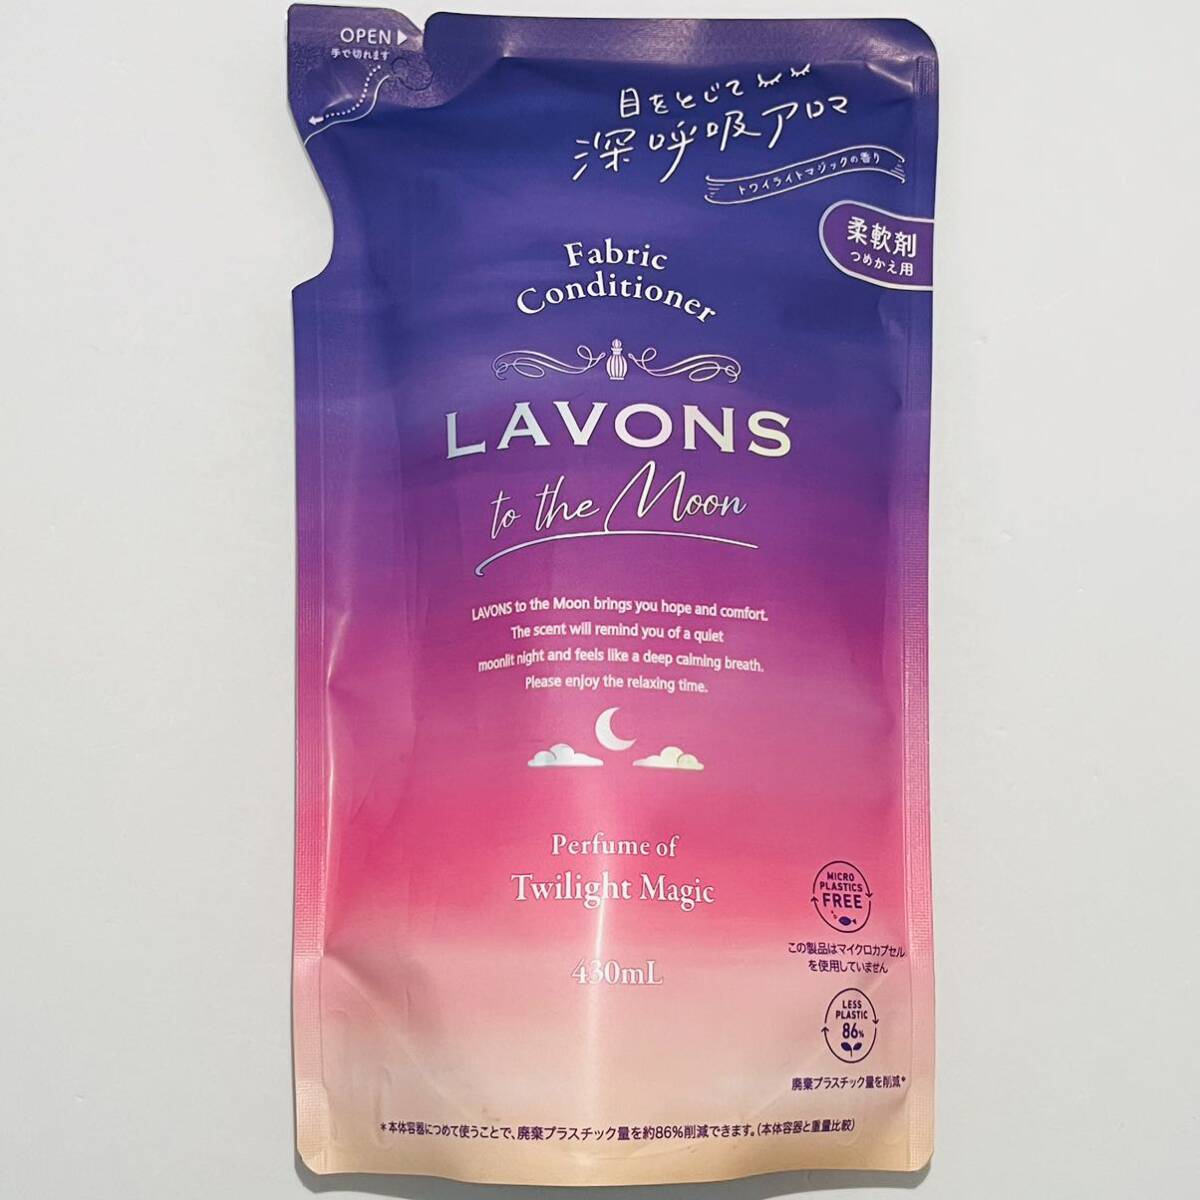 LAVON to the Moon ラボン トゥザムーン 柔軟剤 詰め替え 430ml × 5個 & 試供品付き_画像2